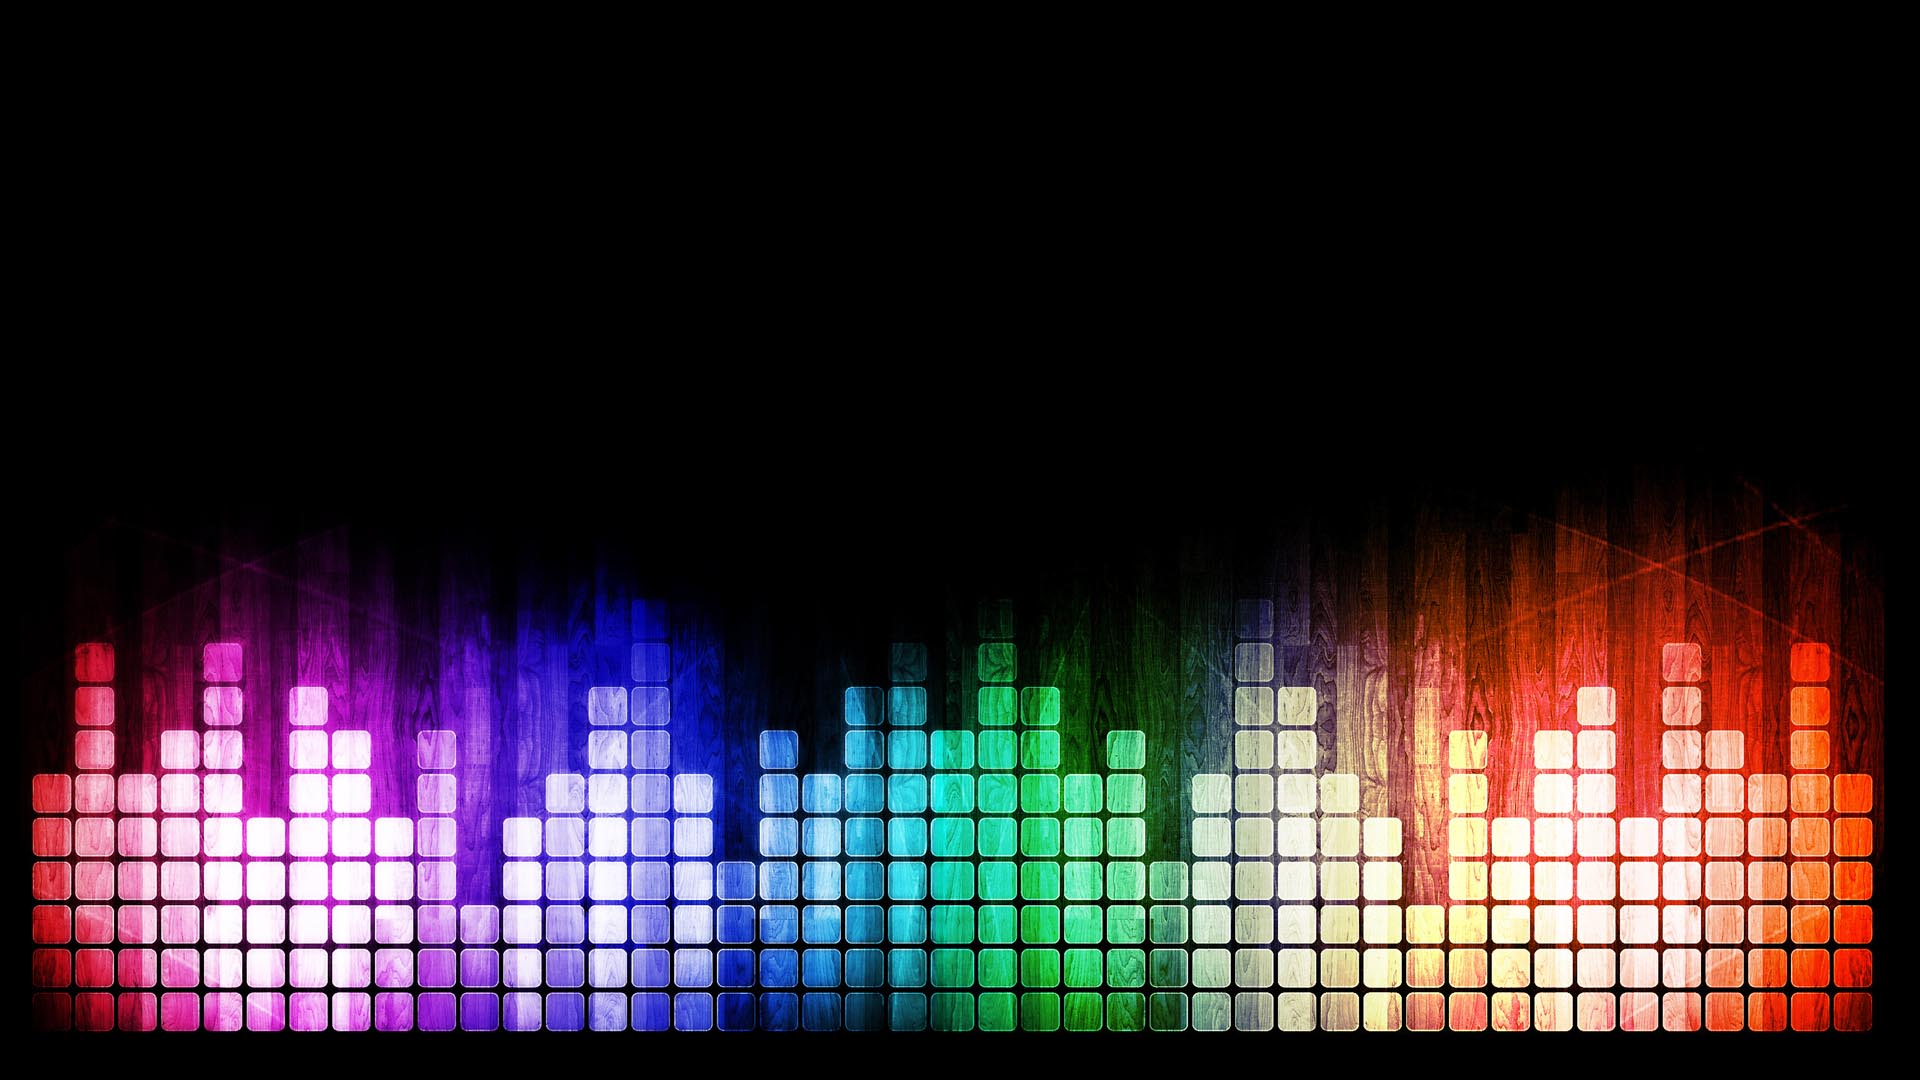 hd wallpapers 1080p music